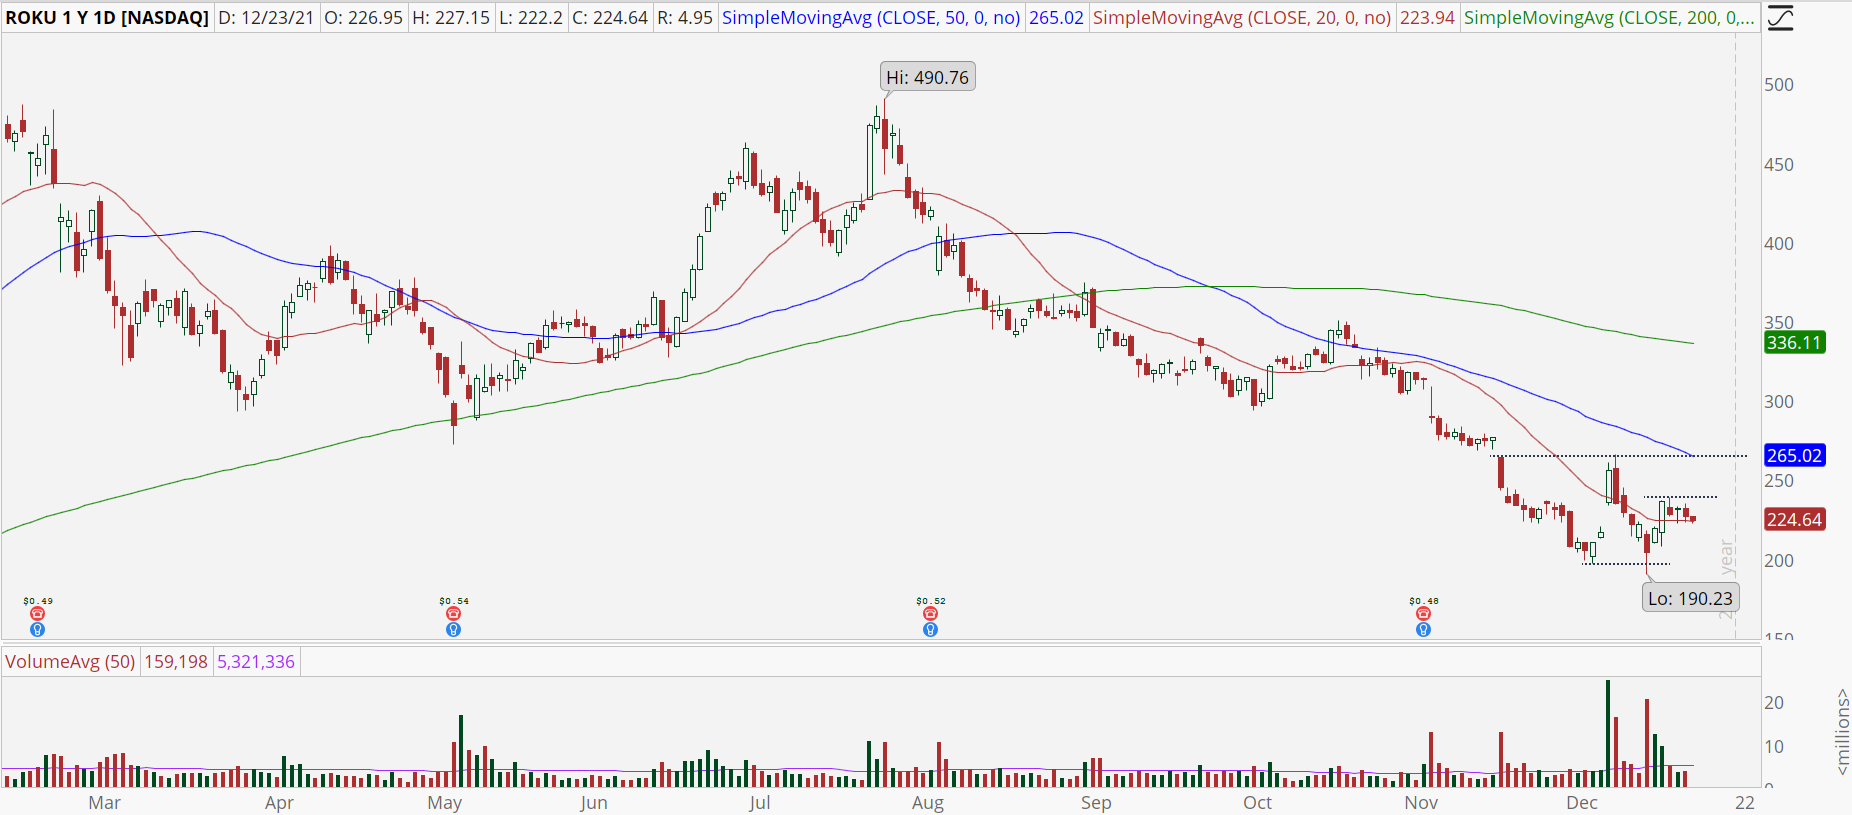 Roku (ROKU) daily chart with slowing momentum.